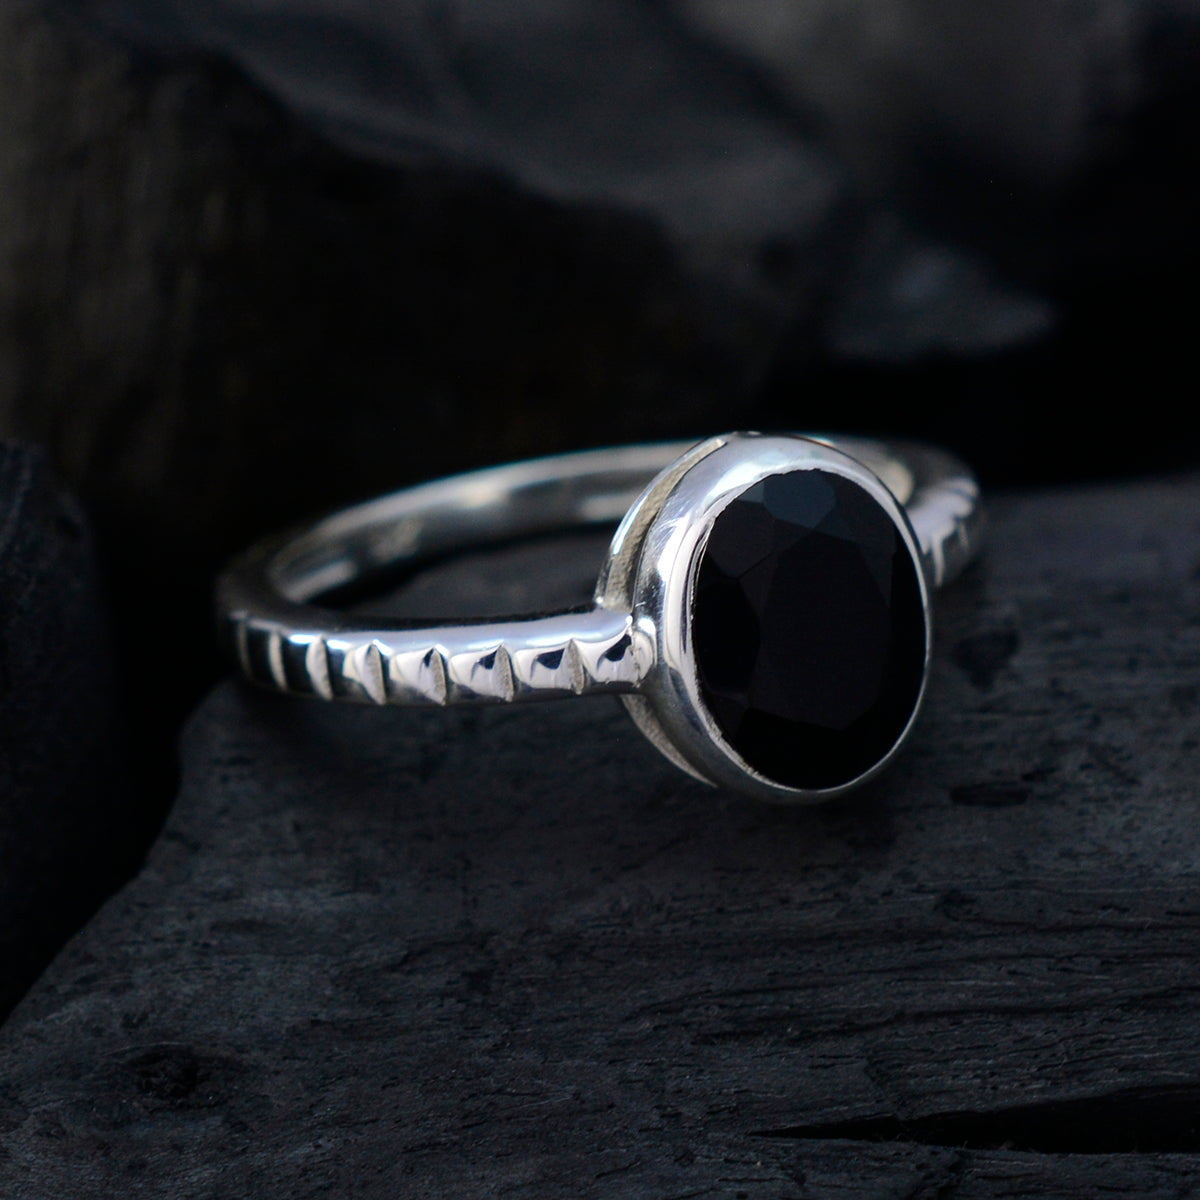 Well-Favoured Gem Black Onyx Sterling Silver Ring Horse Hair Jewelry